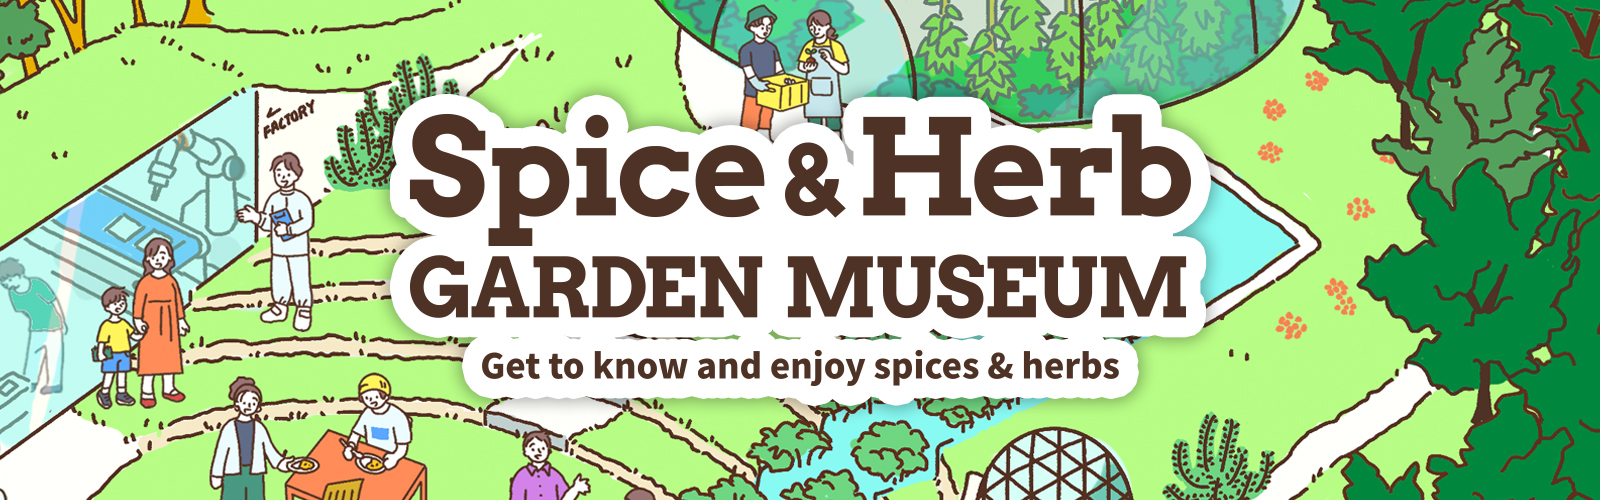 Spice&Herb GARDEN MUSEUM Get to know and enjoy spices & herbs